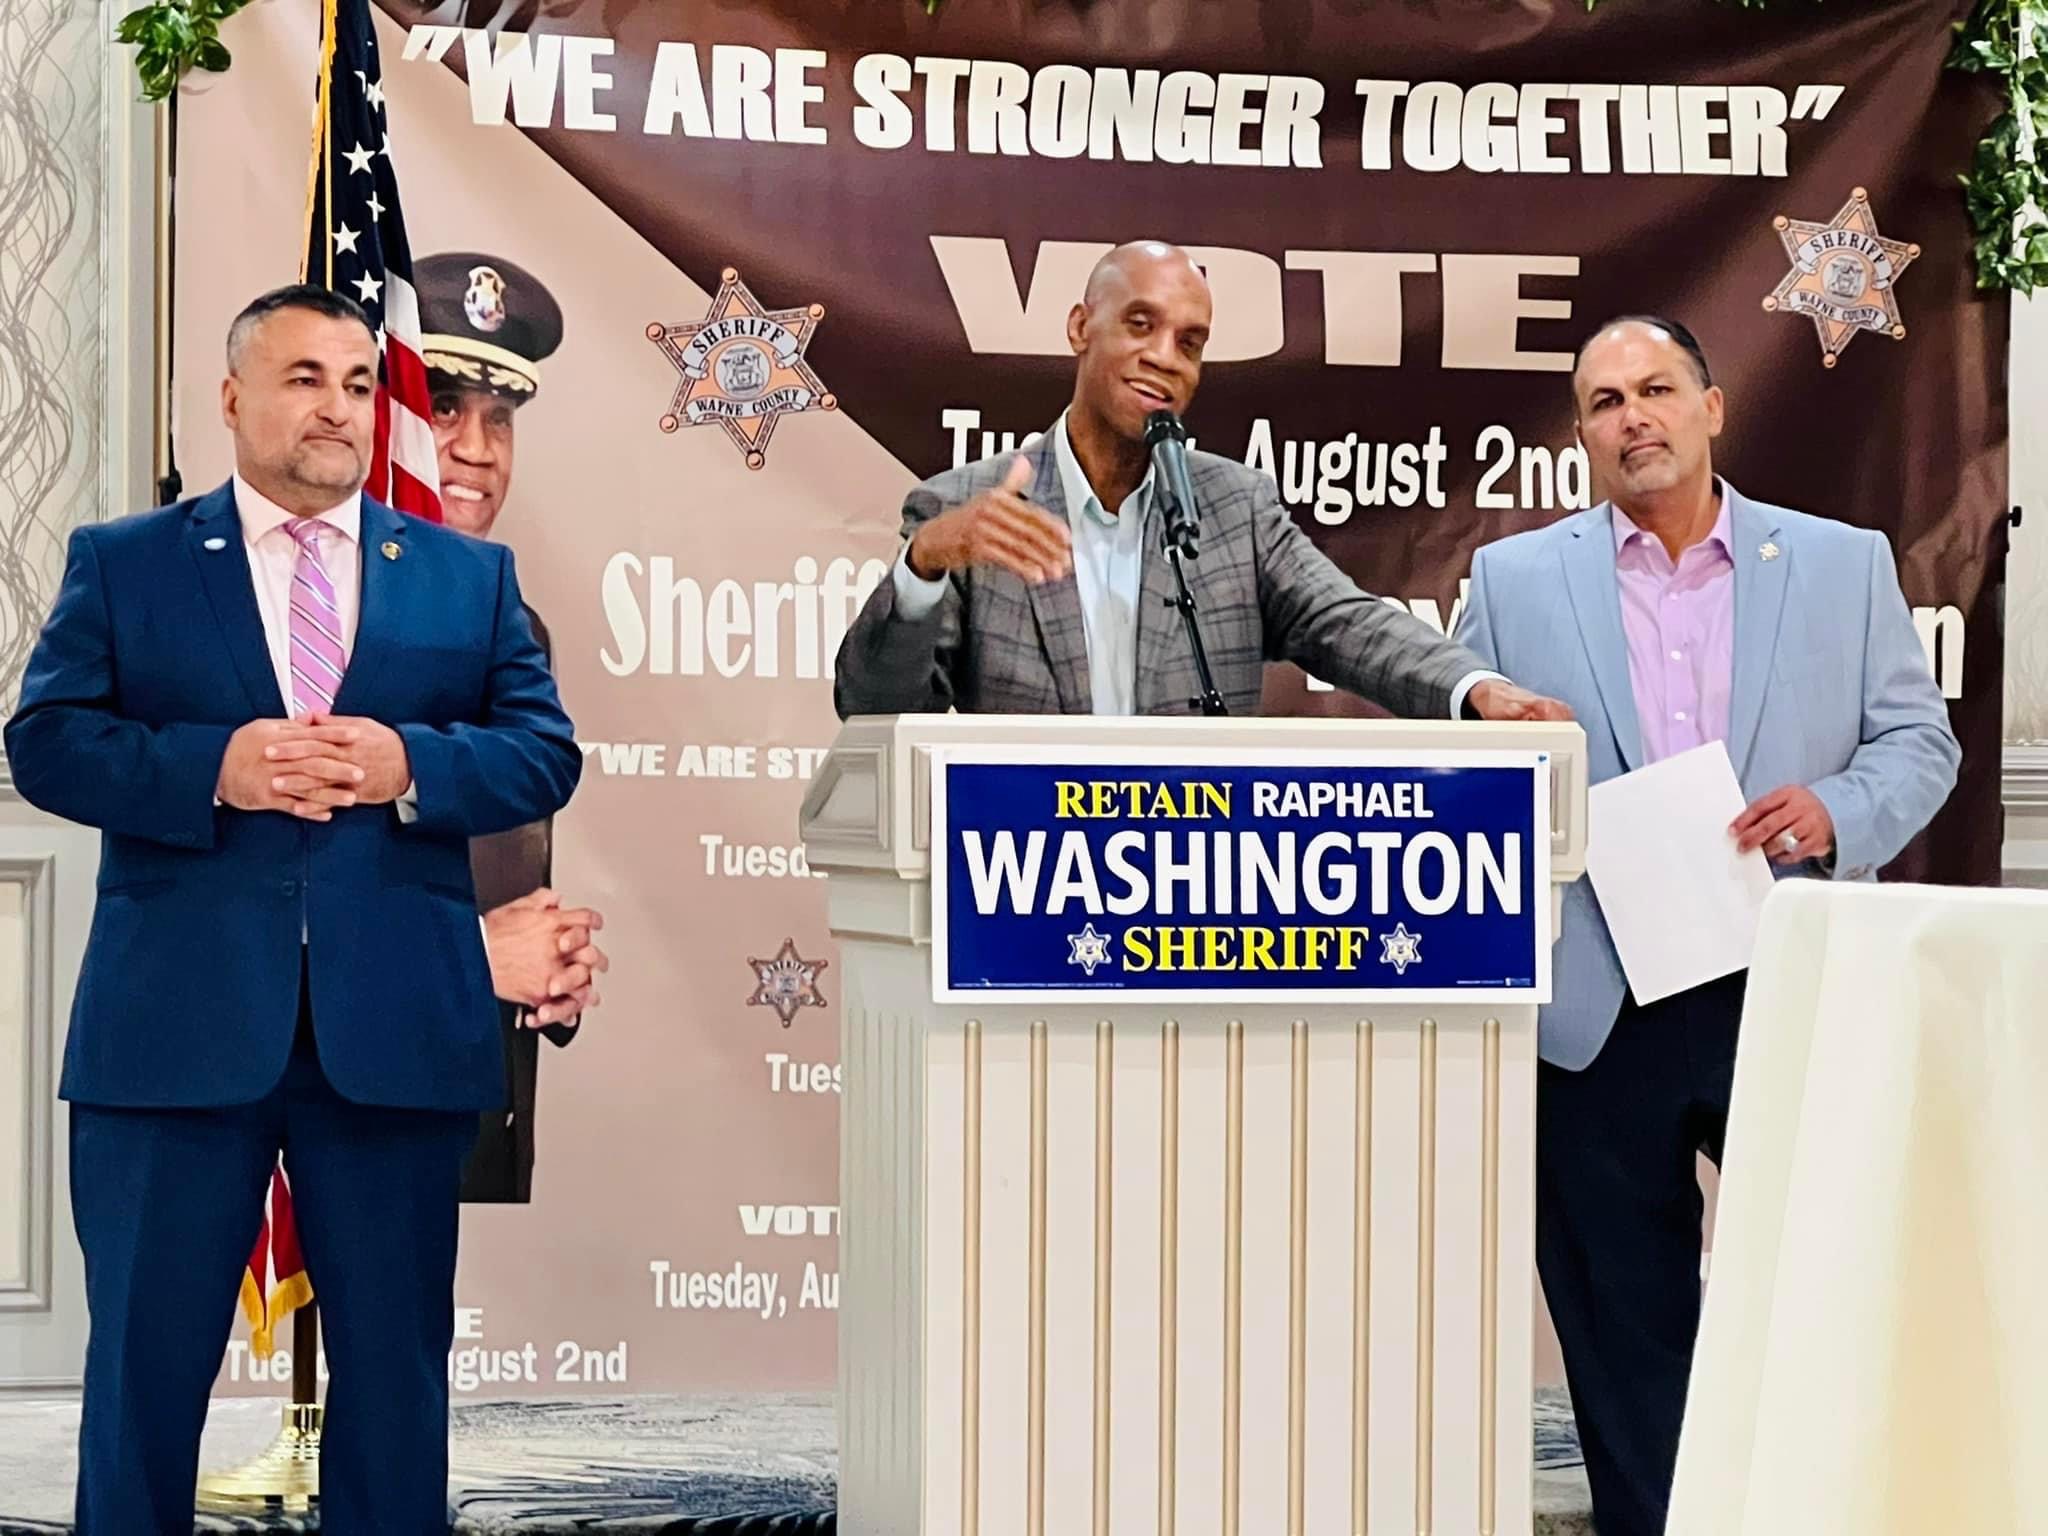 Wayne County Sherrif Raphael Washington speaking at the fundraising event and to his left Undersheriif Mike Jaafar and to his right Wayne County Deputy Director of Homeland Security Sam Jaafar, in Dearborn, Wednesday, May 18.